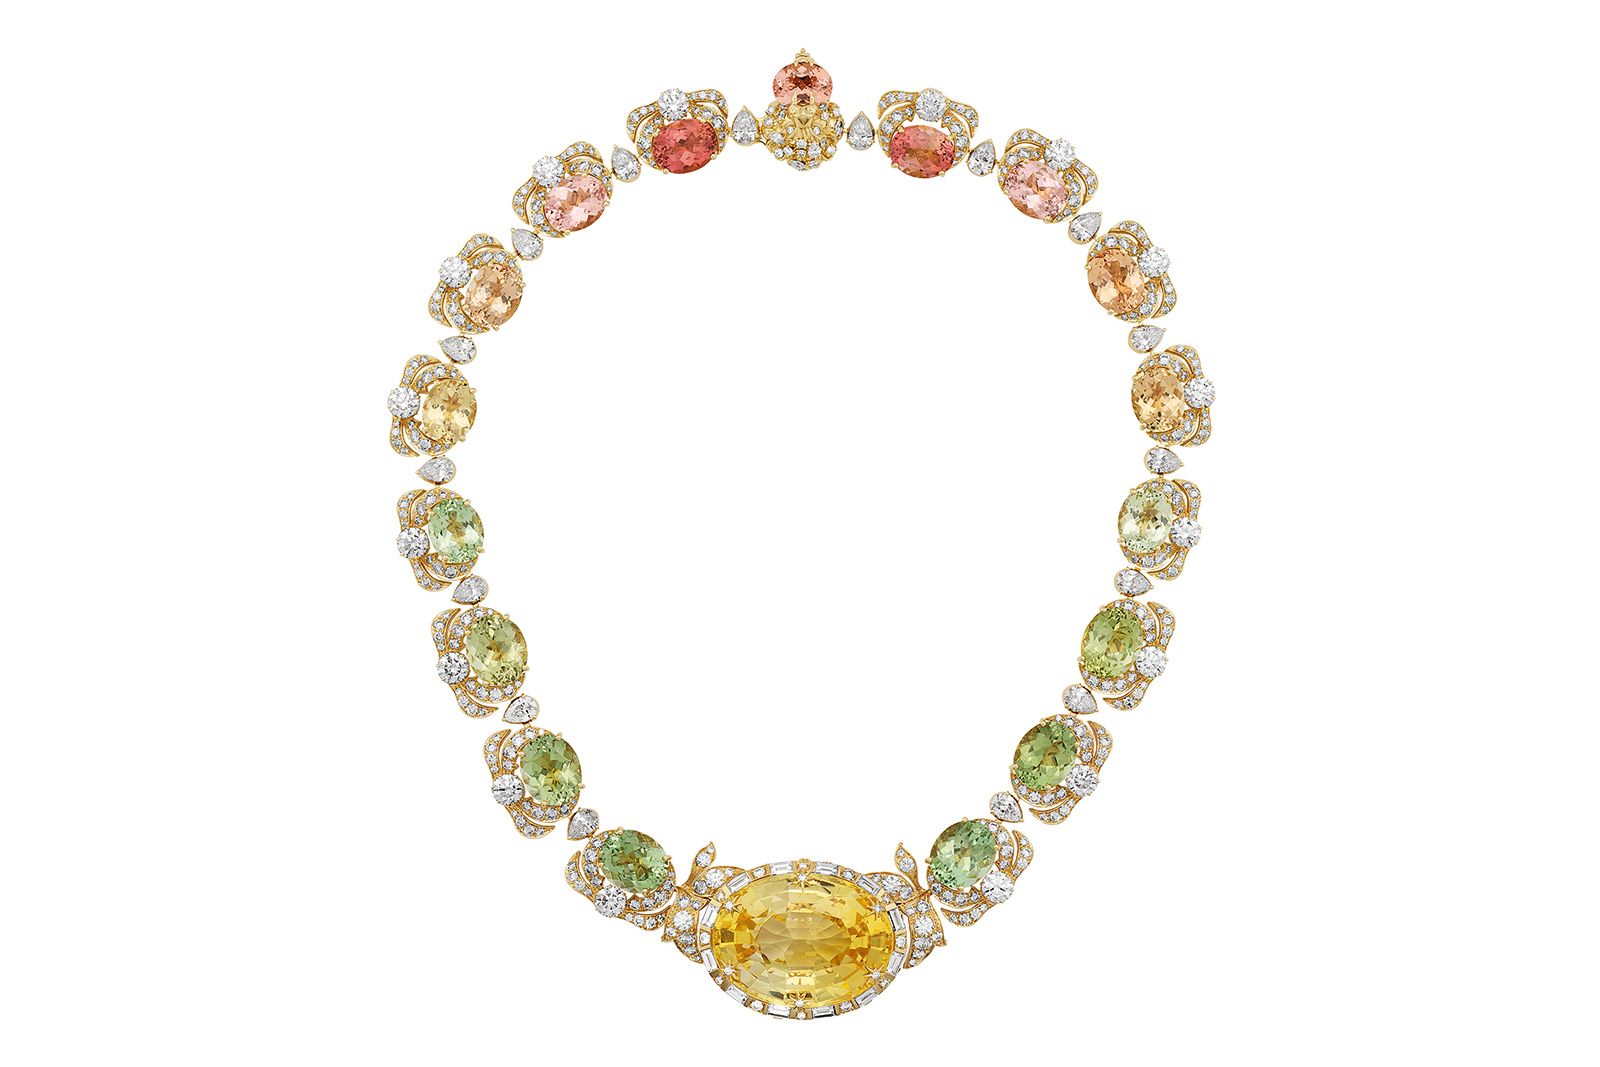 Gucci High Jewellery necklace featuring a 78-ct yellow sapphire, tourmaline, and diamonds from the Allegoria High Jewellery Collection